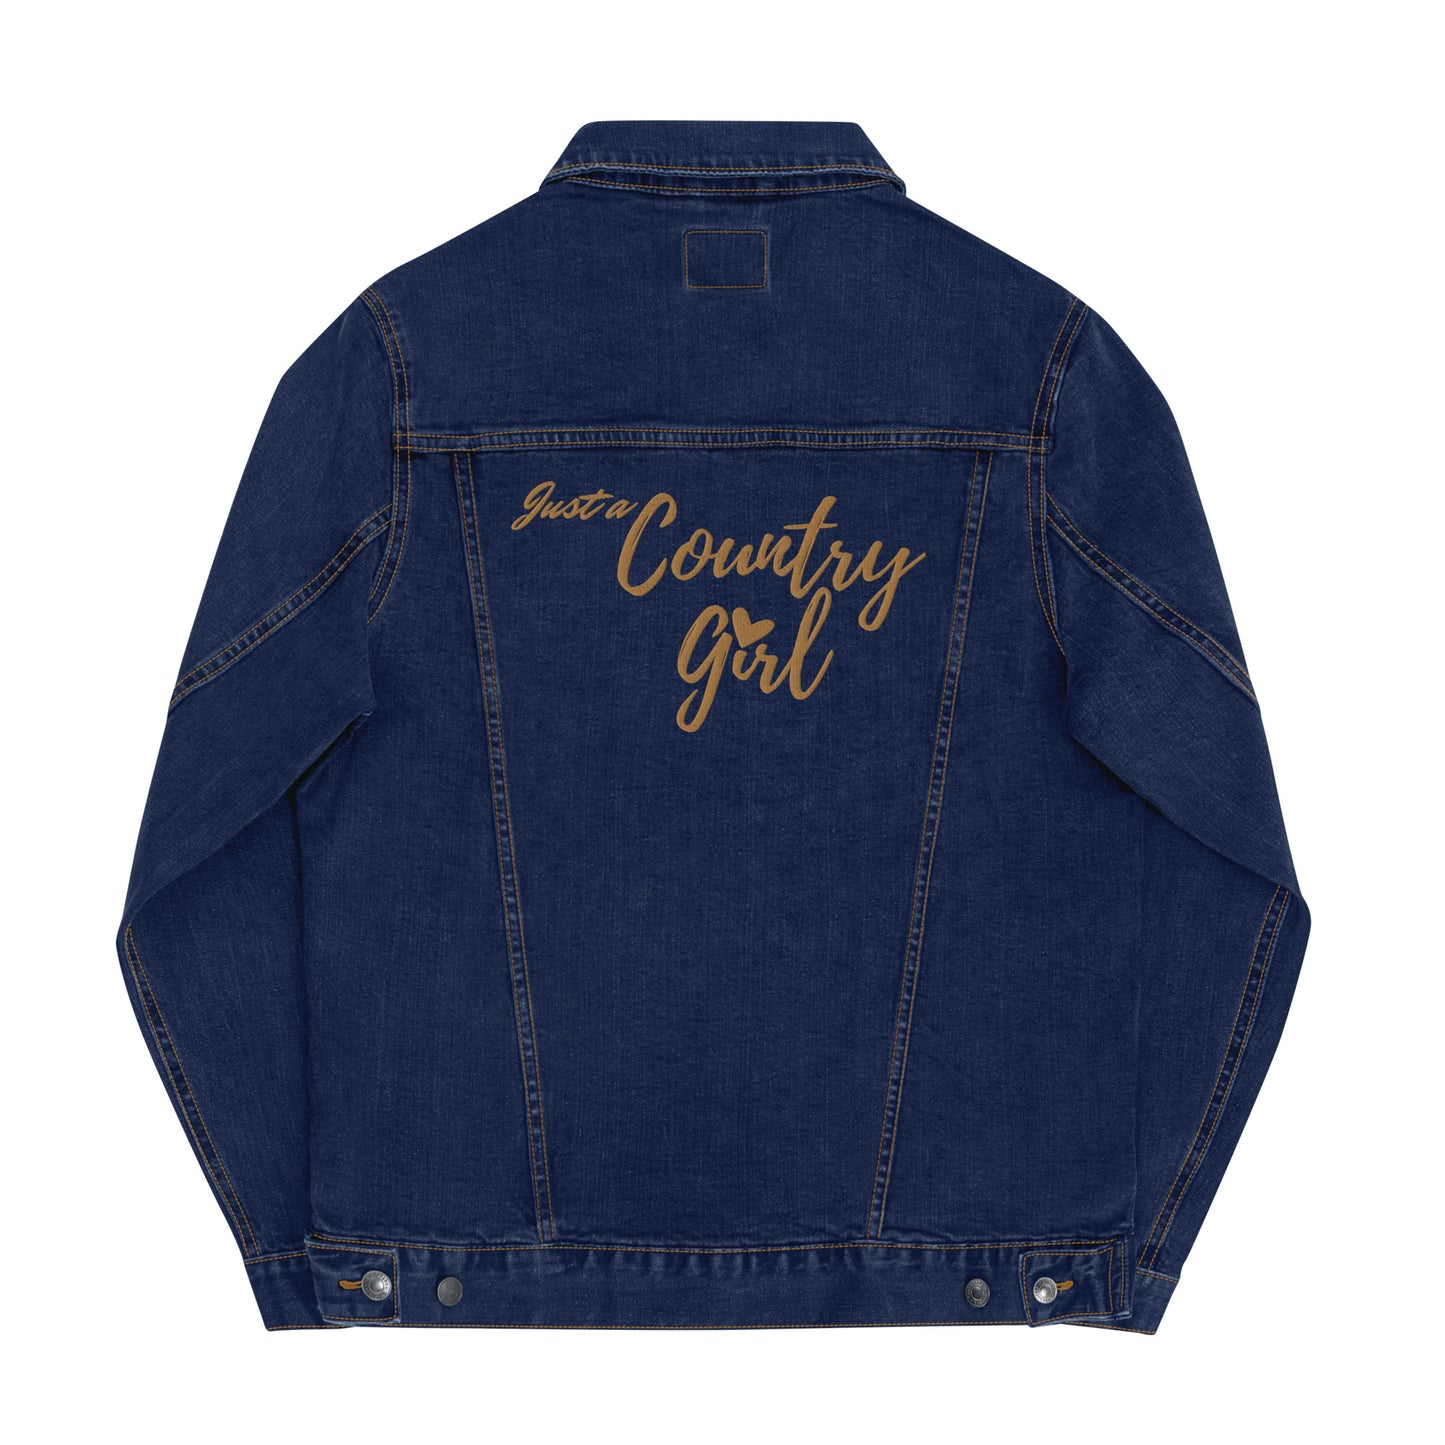 Back view of a blue denim jean jacket embroidered in gold thread with the words Just a Country Girl and the dot for the i is a heart.